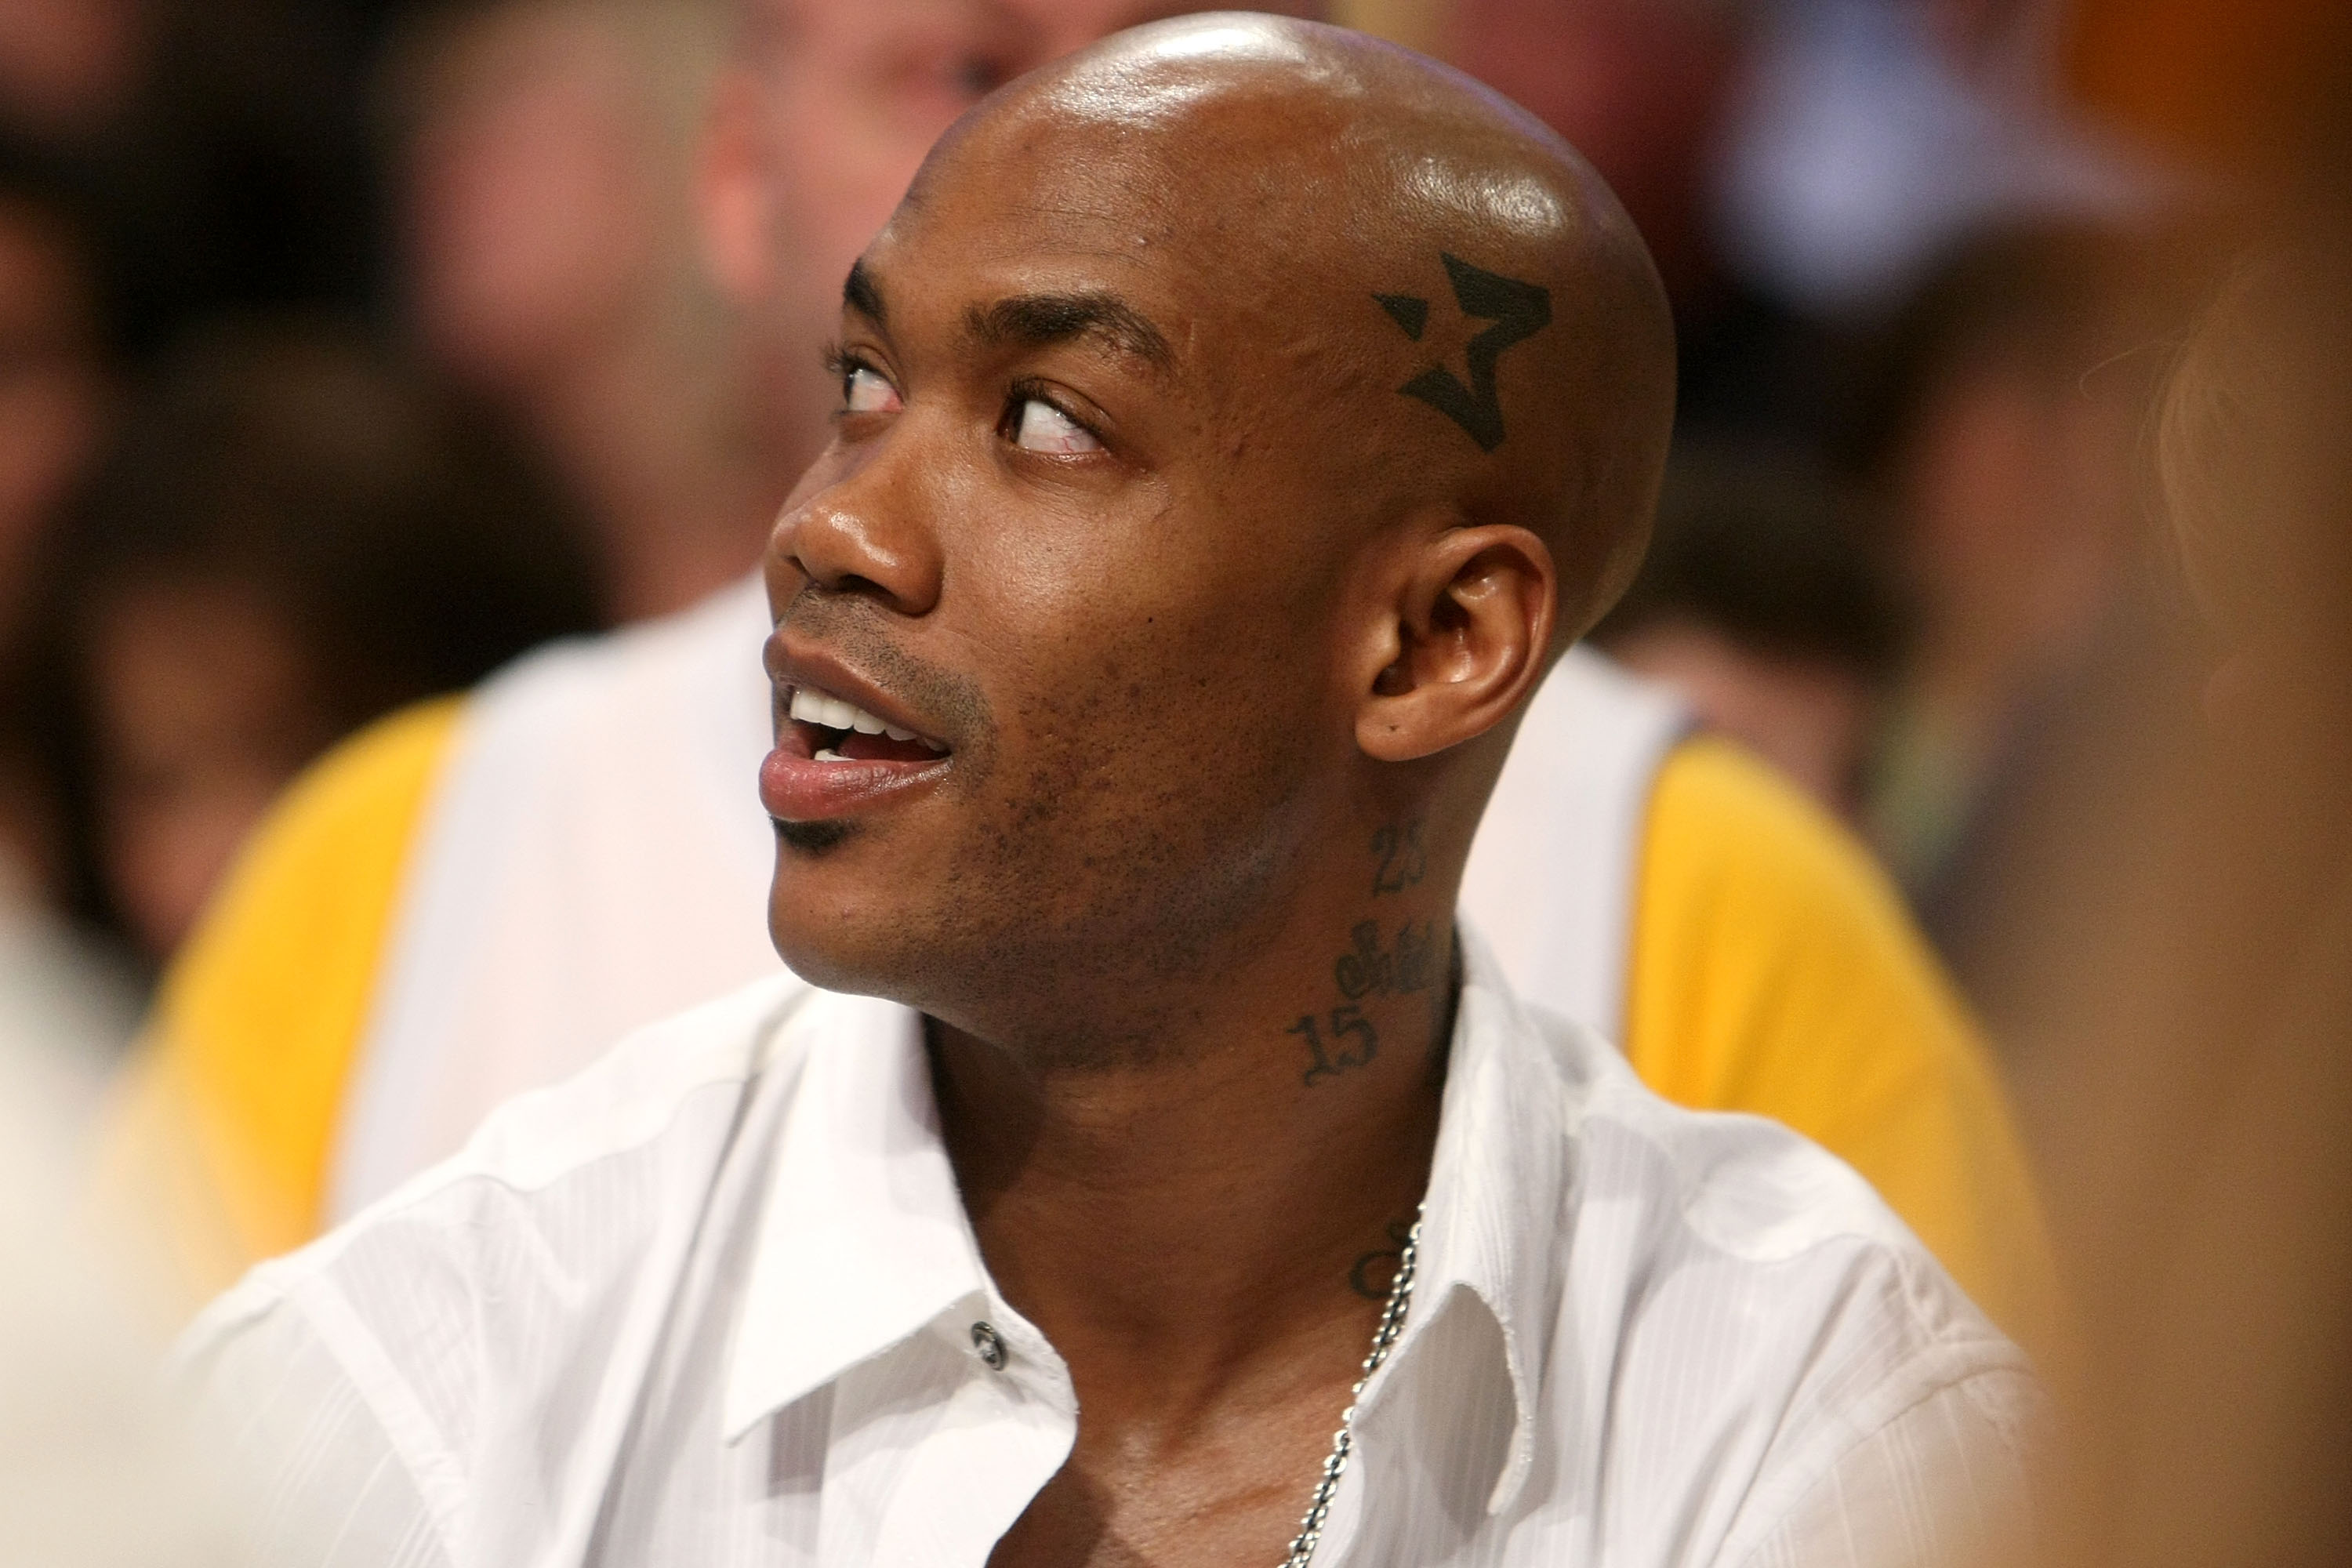 LOS ANGELES, CA - JUNE 07:  Stephon Marbury of the Boston Celtics attends Game Two of the 2009 NBA Finals between the Los Angeles Lakers and the Orlando Magic at Staples Center on June 7, 2009 in Los Angeles, California. NOTE TO USER: User expressly ackno